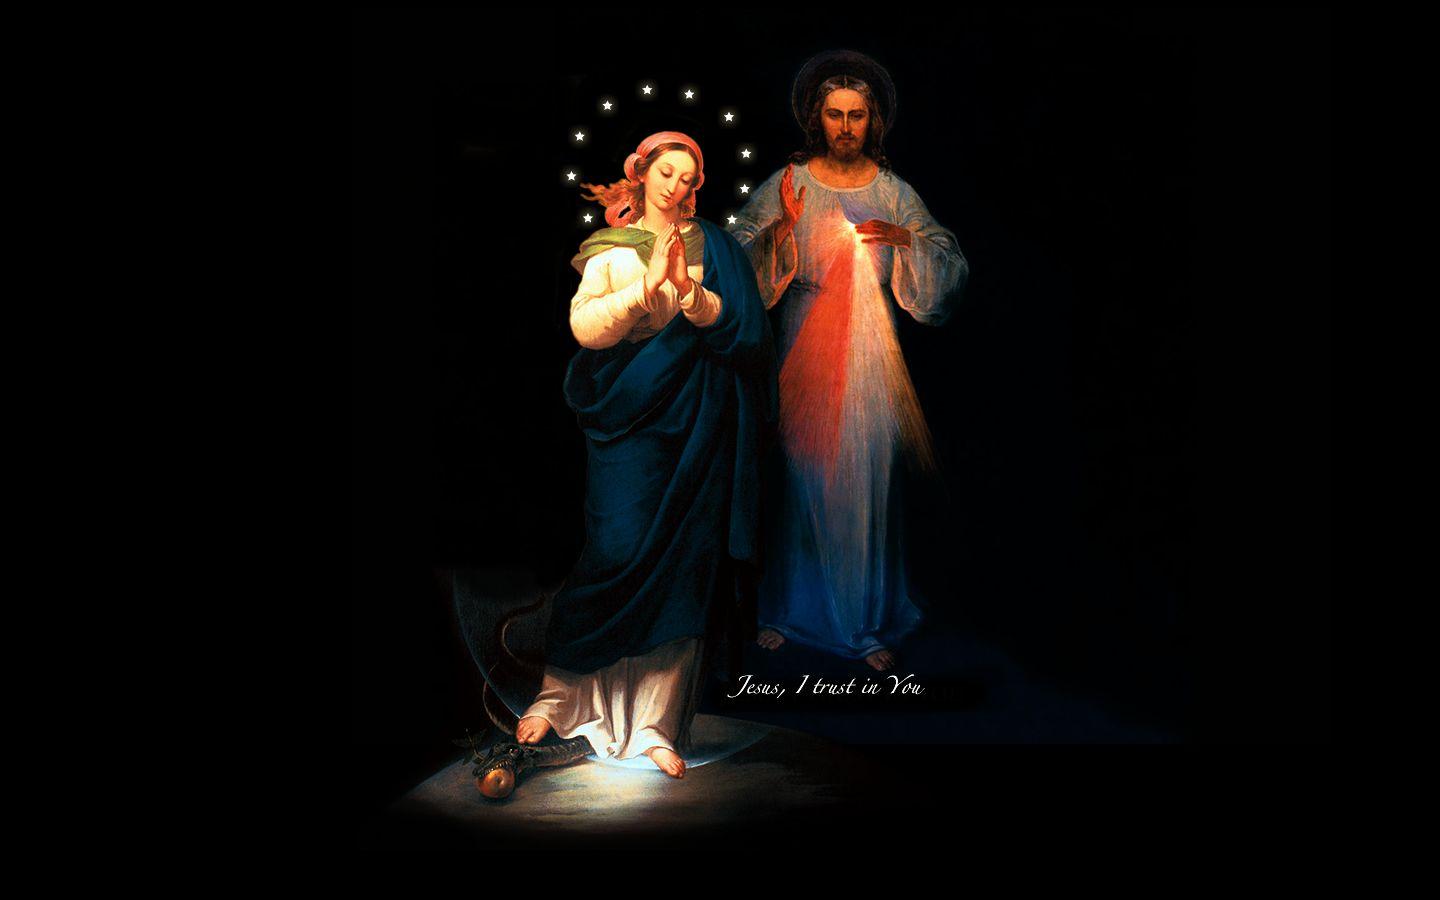 Download the Marian.org Wallpaper. The Divine Mercy